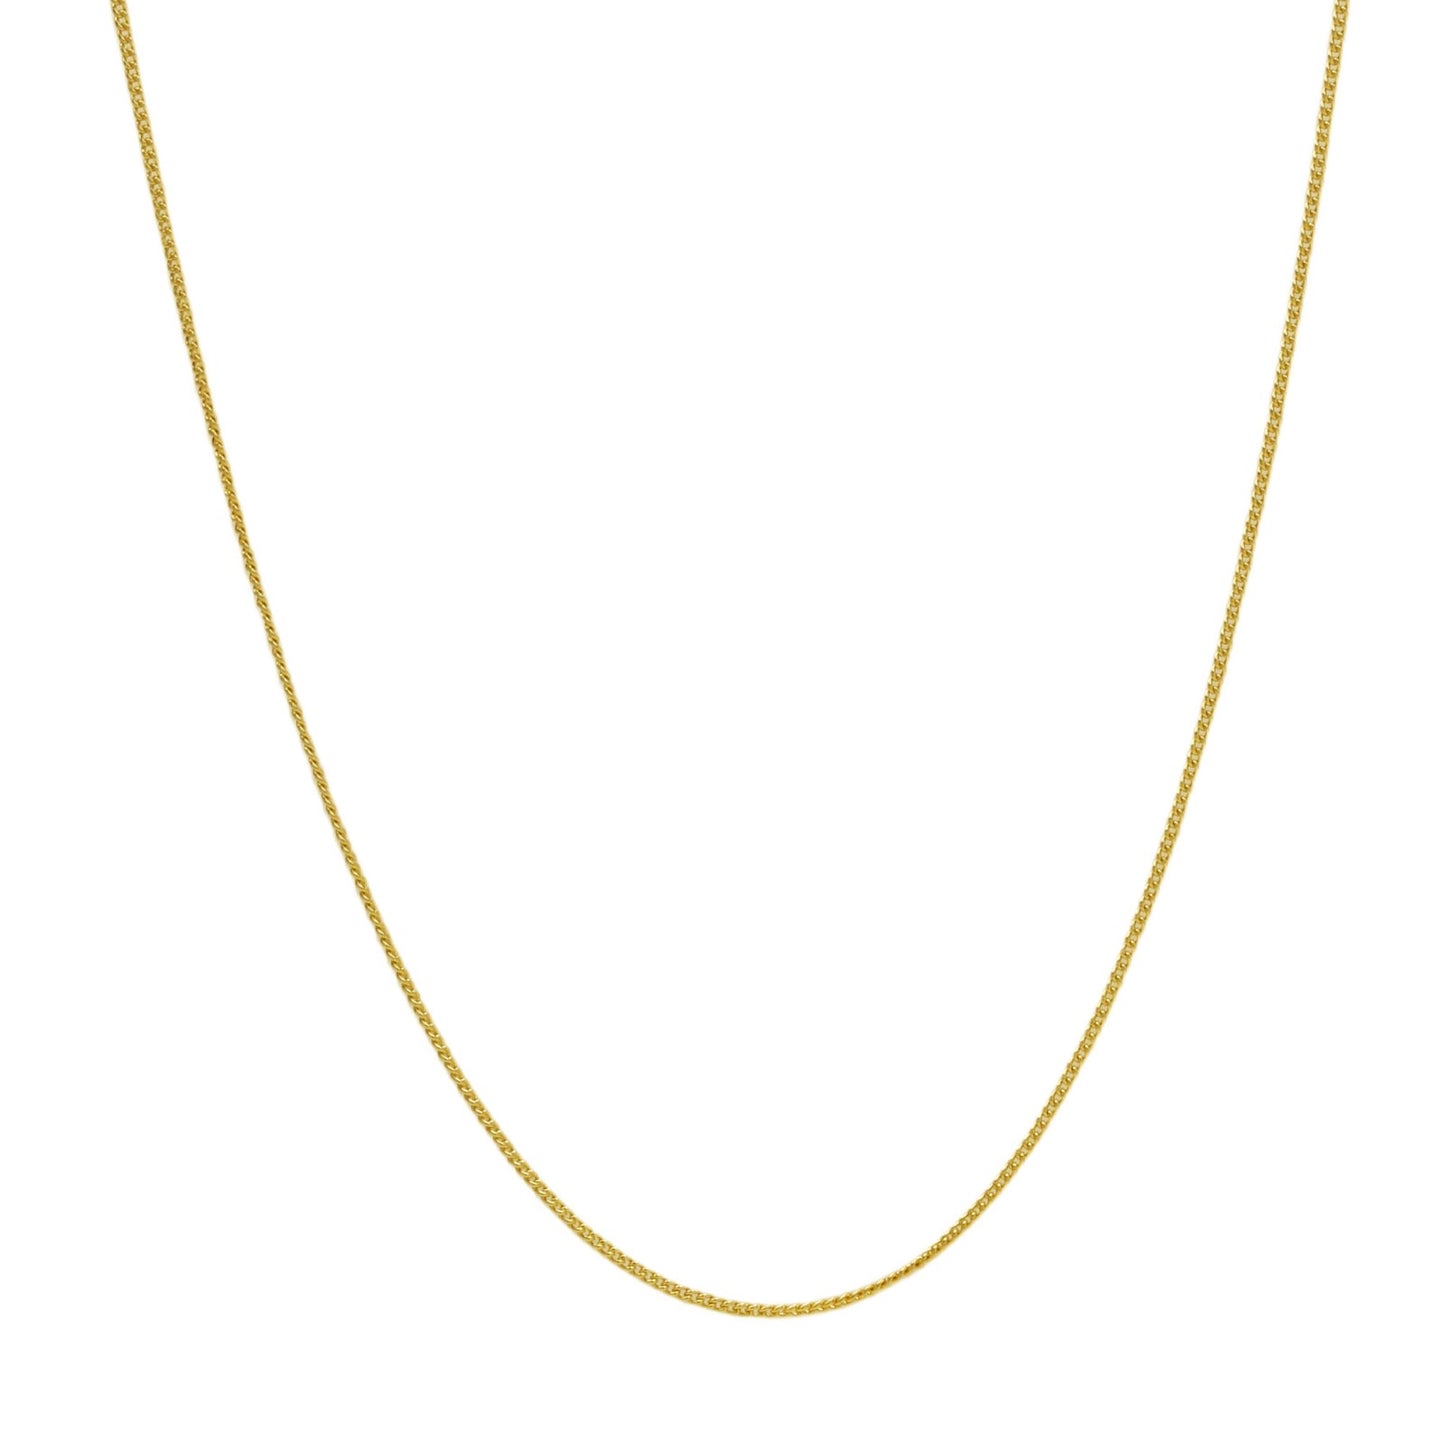 PUFFY DIY CHAIN - 18K Gold Plated